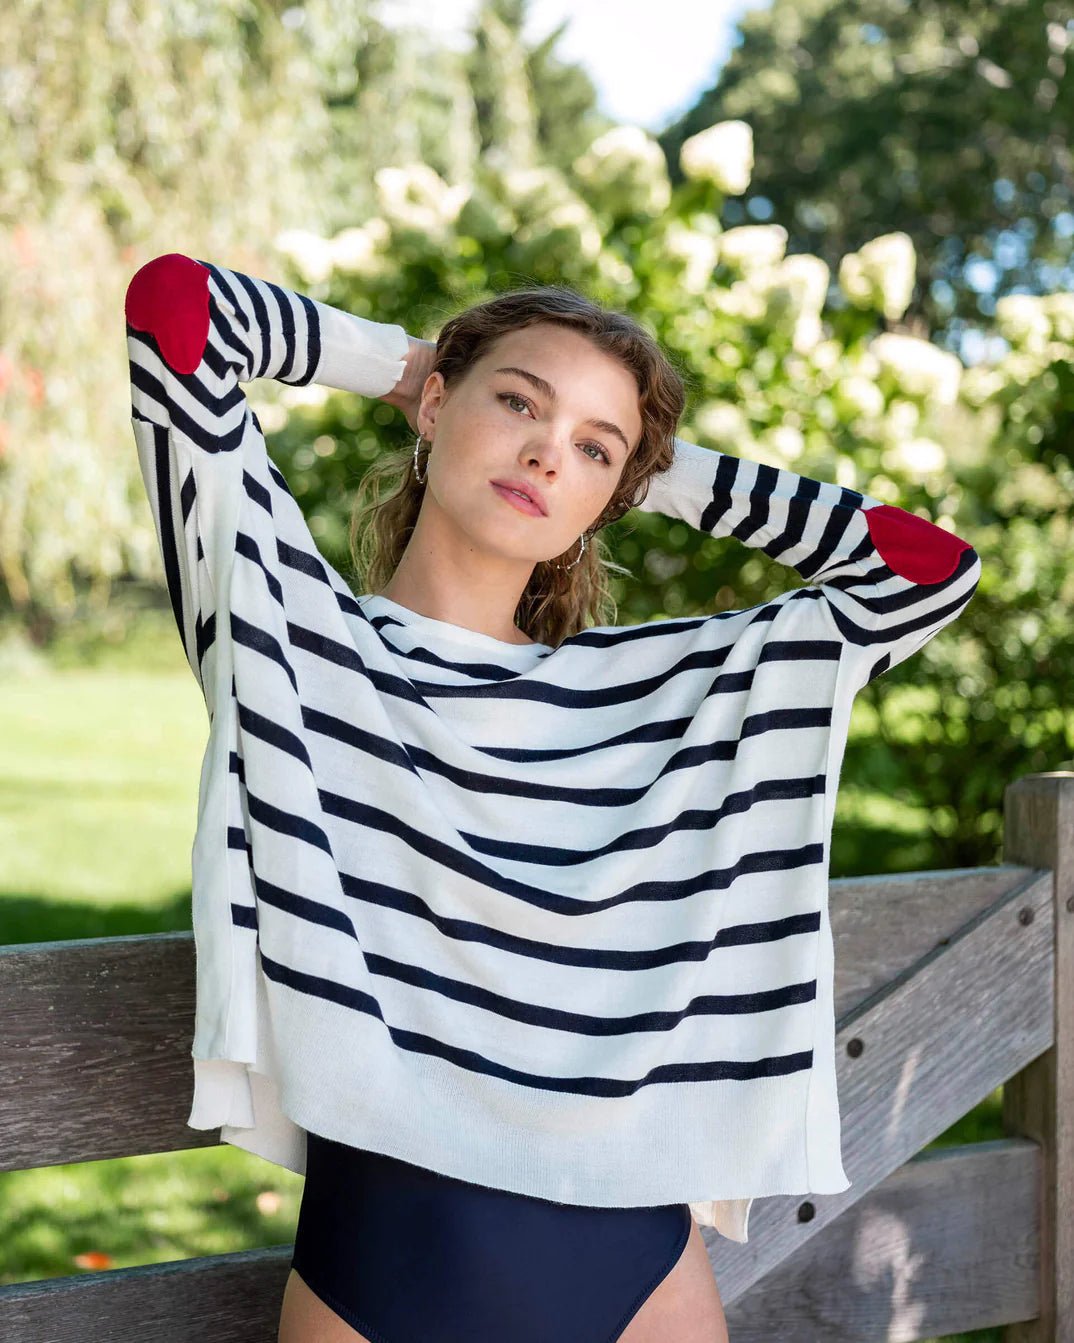 Mersea Amour Sweater - The Riviera Towel Company